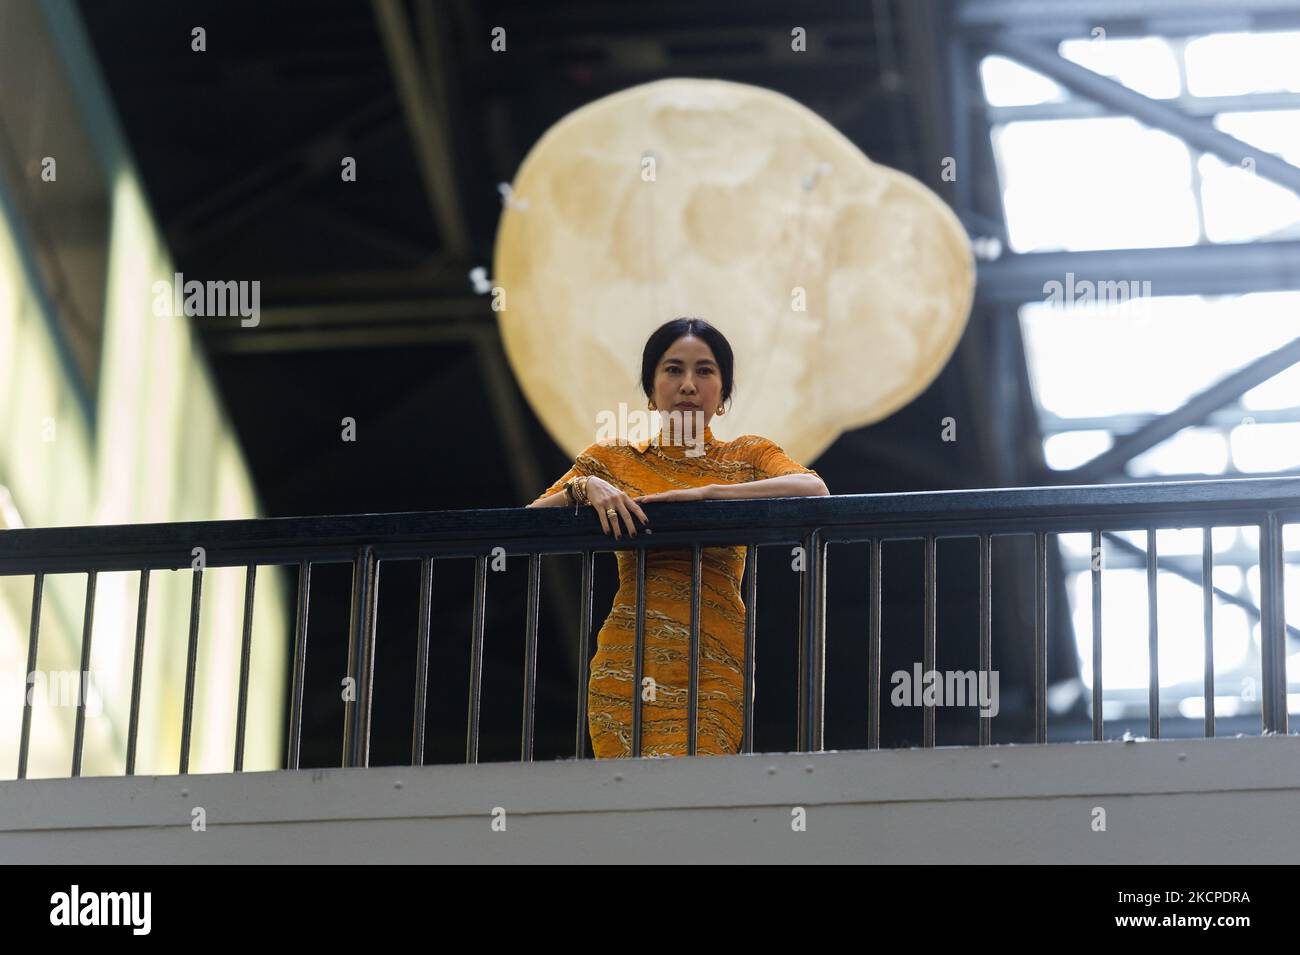 LONDON, UNITED KINGDOM - OCTOBER 11, 2021: Korean American conceptual artist Anicka Yi attends a press view at Tate Modern as the gallery unveils her new aerial work at the Turbine Hall titled 'In Love With The World' for the 2021 Hyundai Commission on October 11, 2021 in London, England. (Photo by WIktor Szymanowicz/NurPhoto) Stock Photo